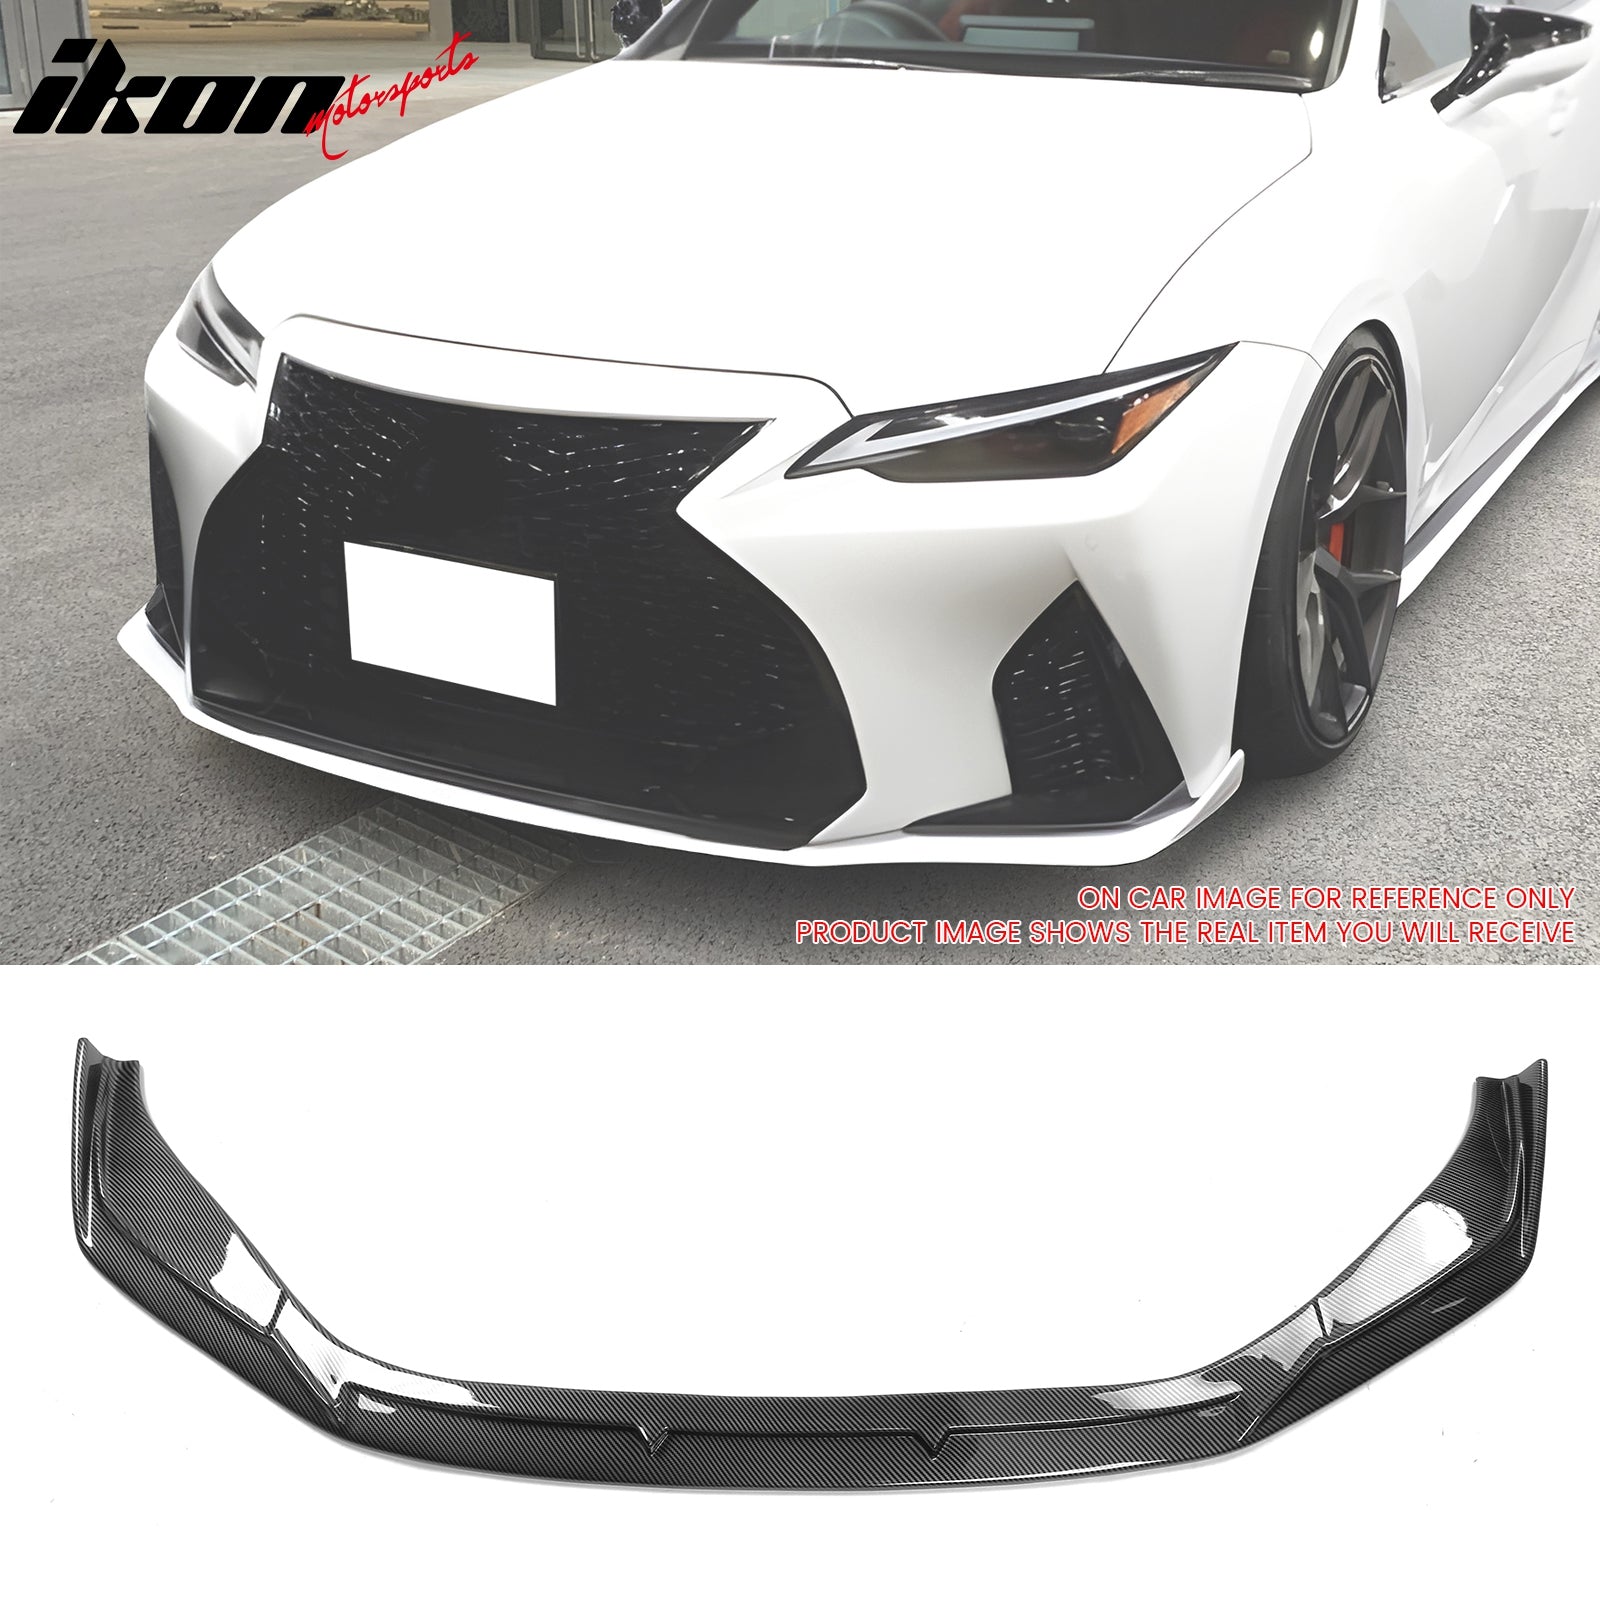 IKON MOTORSPORTS Front Bumper Lip, Compatible with 2021-2024 Lexus IS350  IS300 F Sport, IKON V2 Style ABS Plastic Air Dam Chin Spoiler Protector